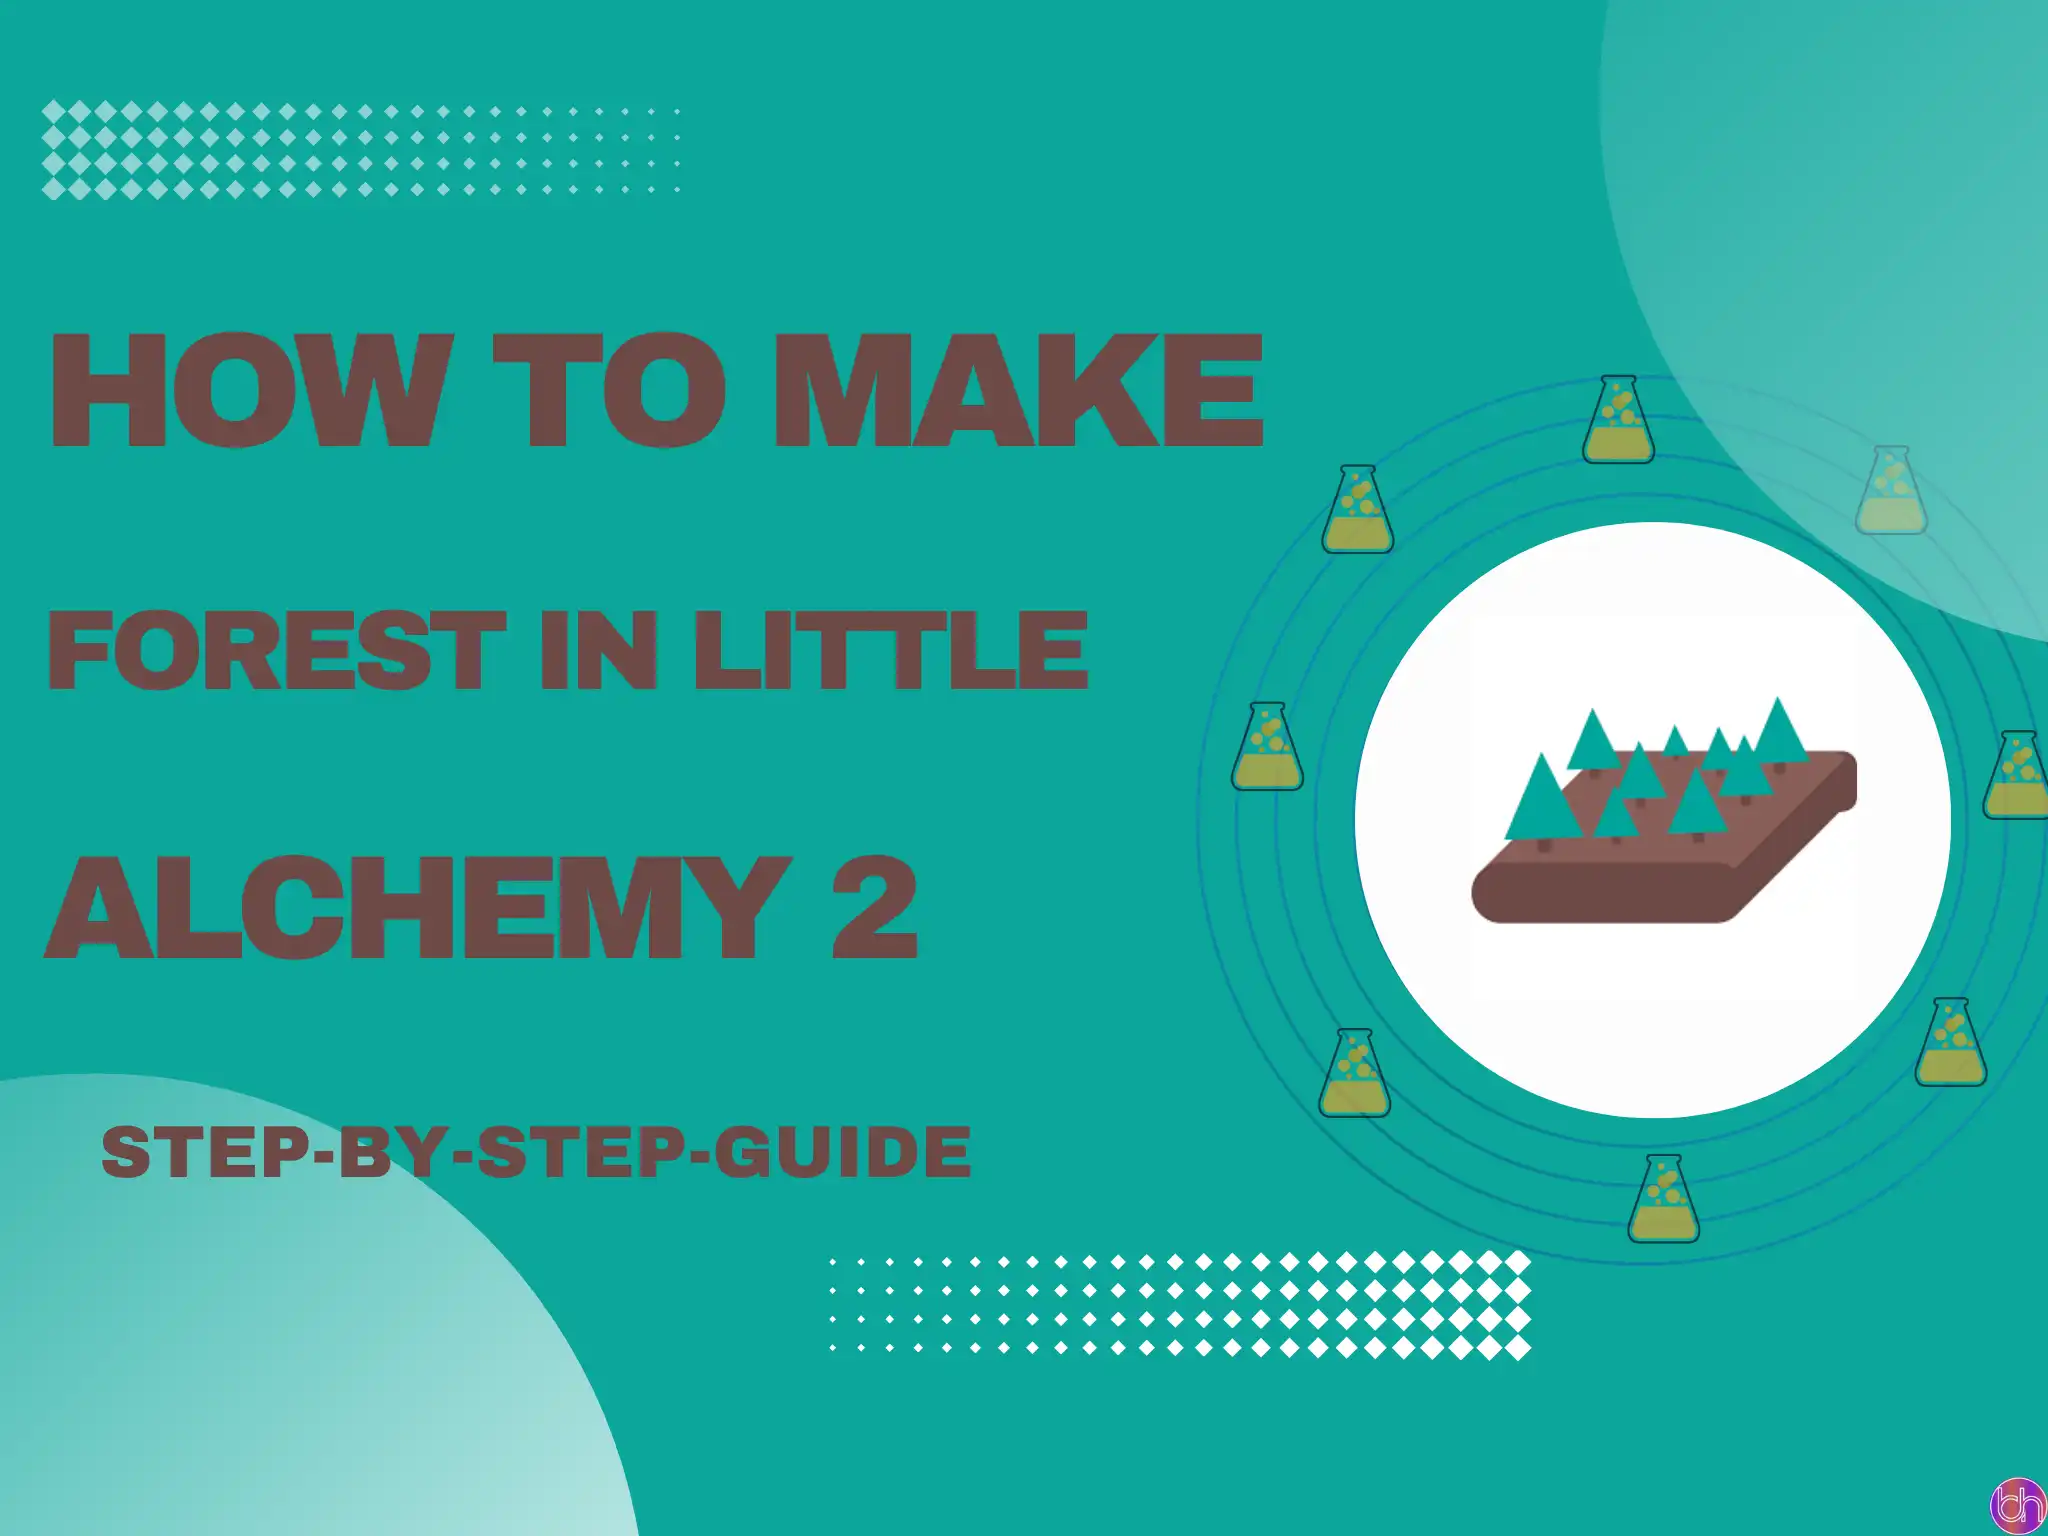 How to make Forest in Little Alchemy 2